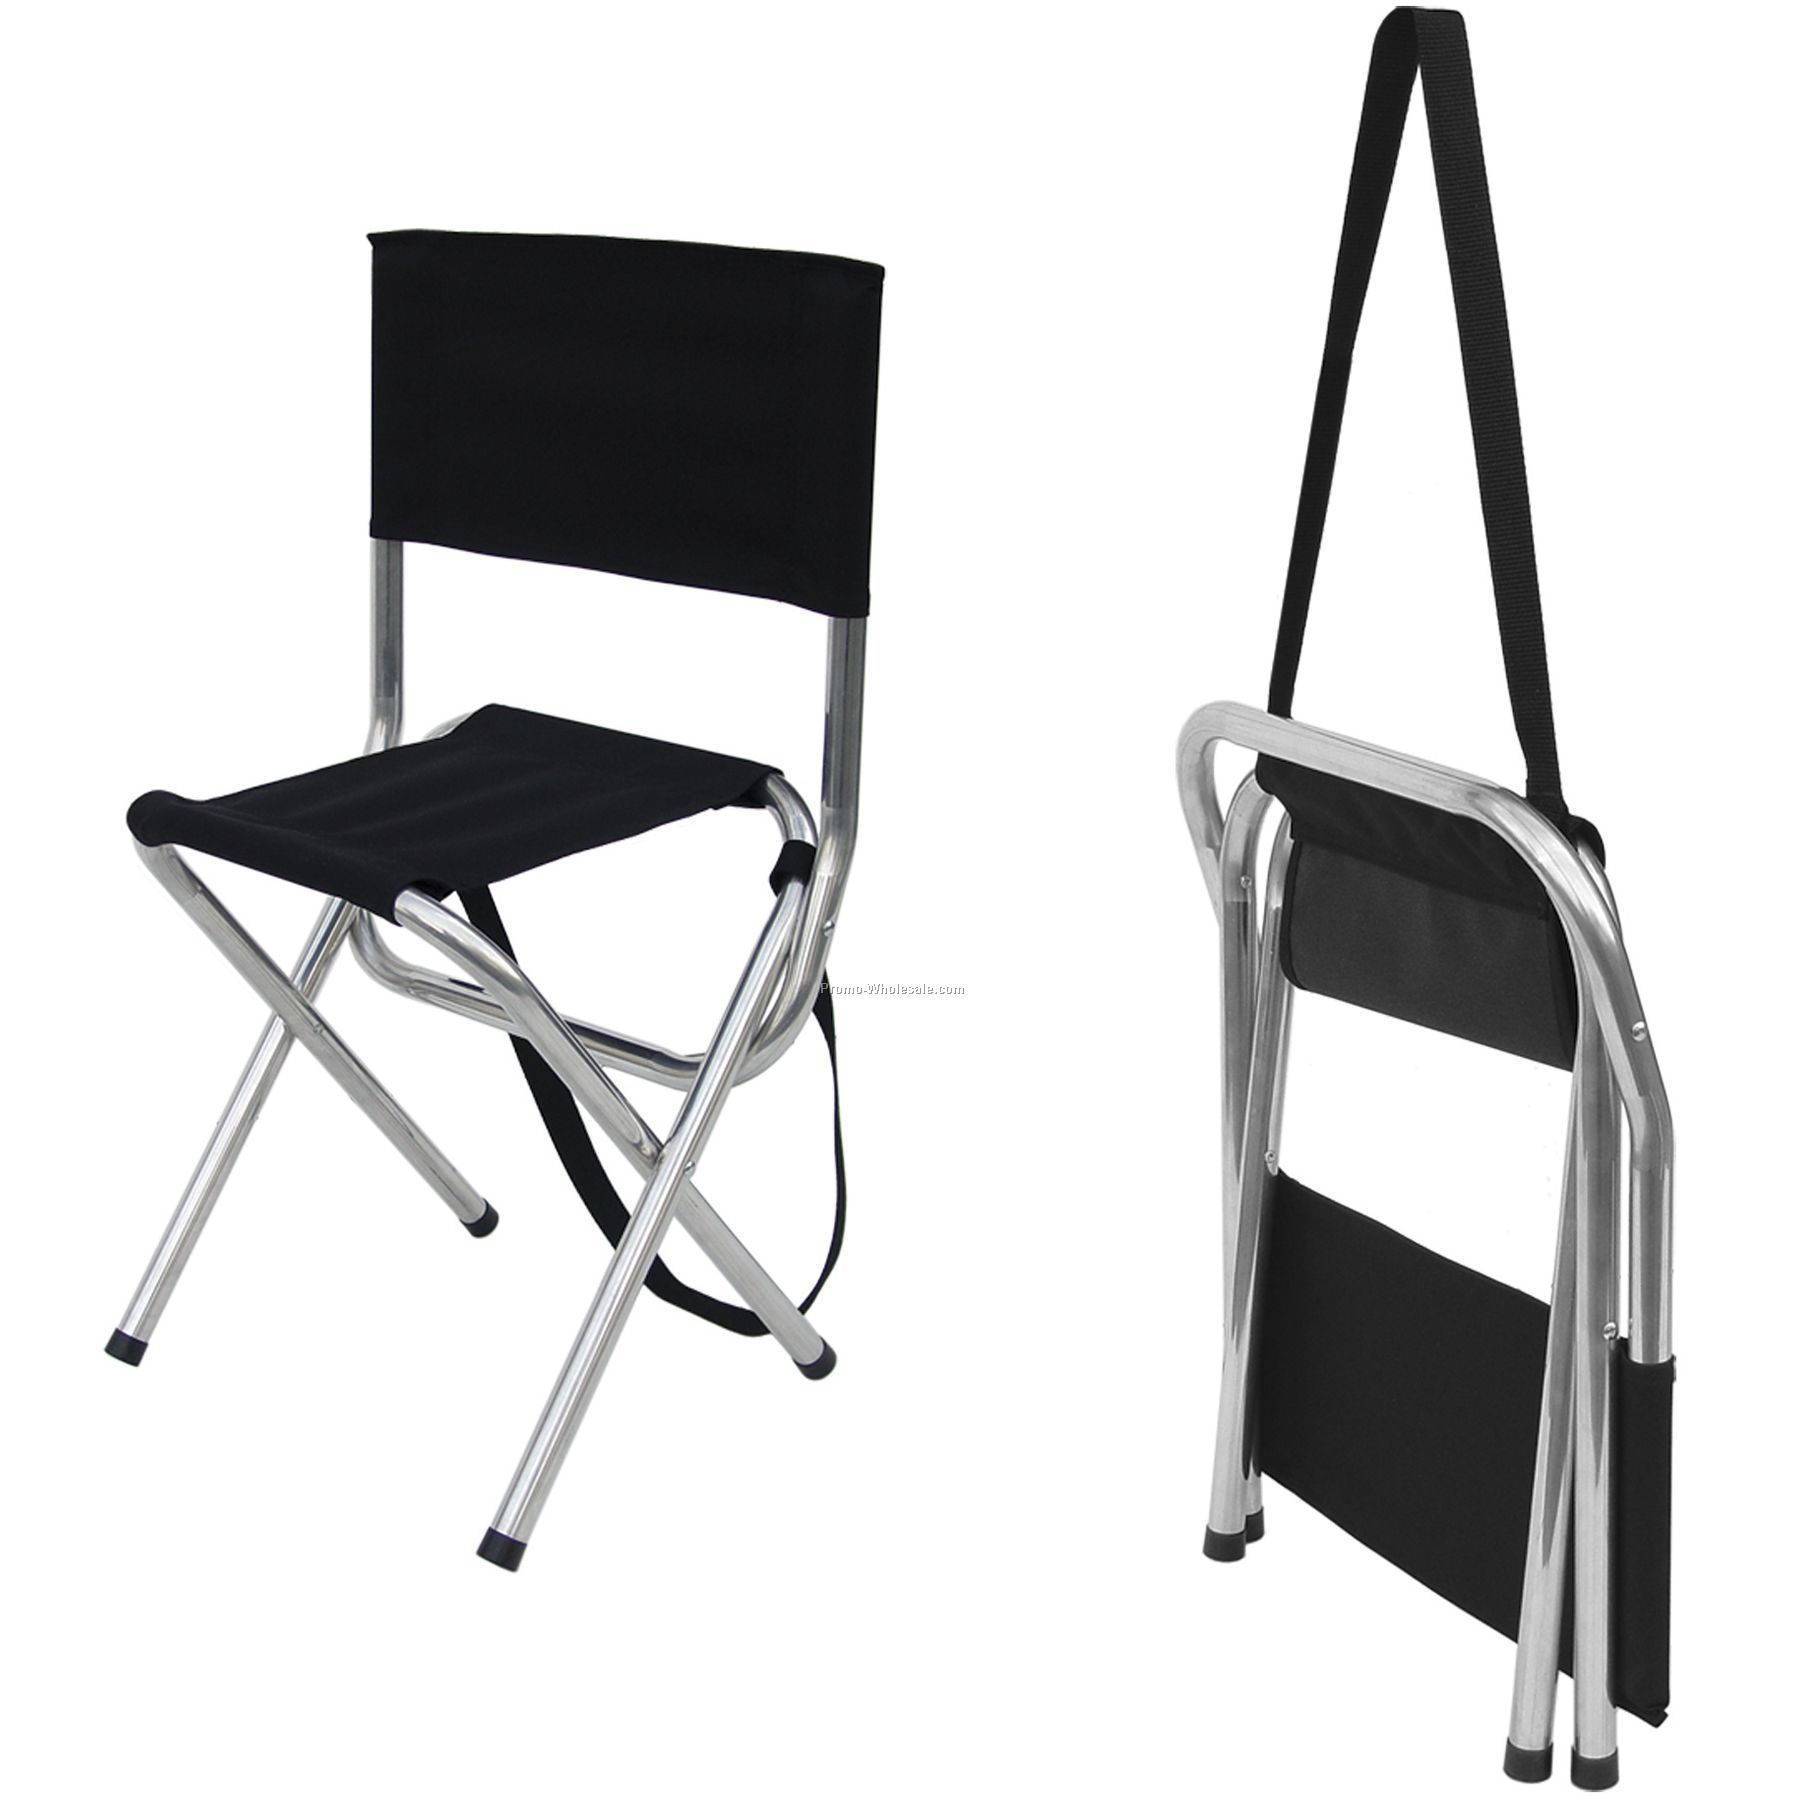 Deluxe Golf Chair 7/8" Aluminum Frame W/ Carry Strap (Digital Full Color)